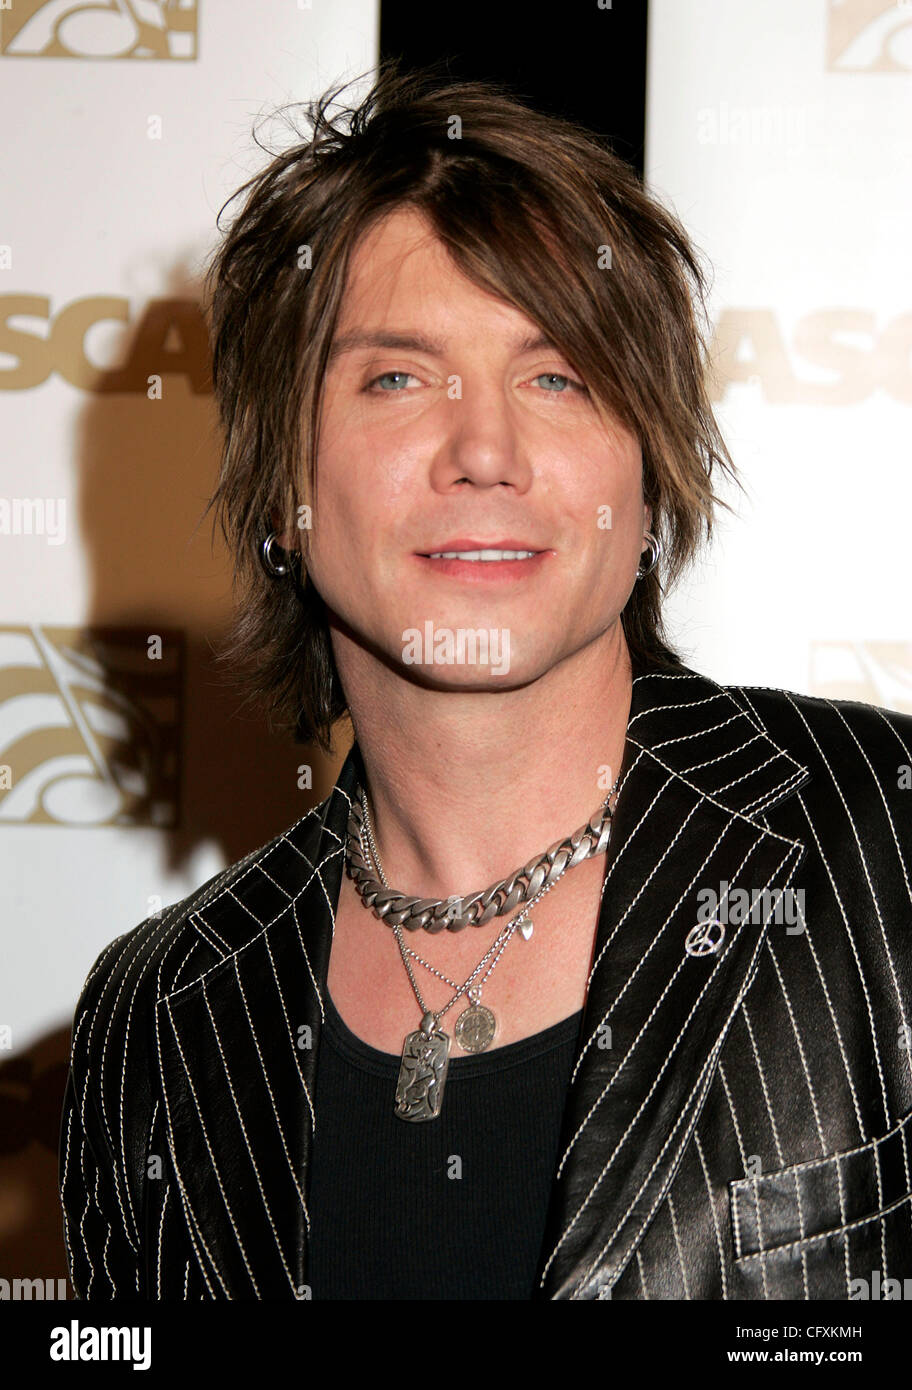 February 13: Johnny Rzeznik of Goo Goo Dolls performs at Philips Arena in A...